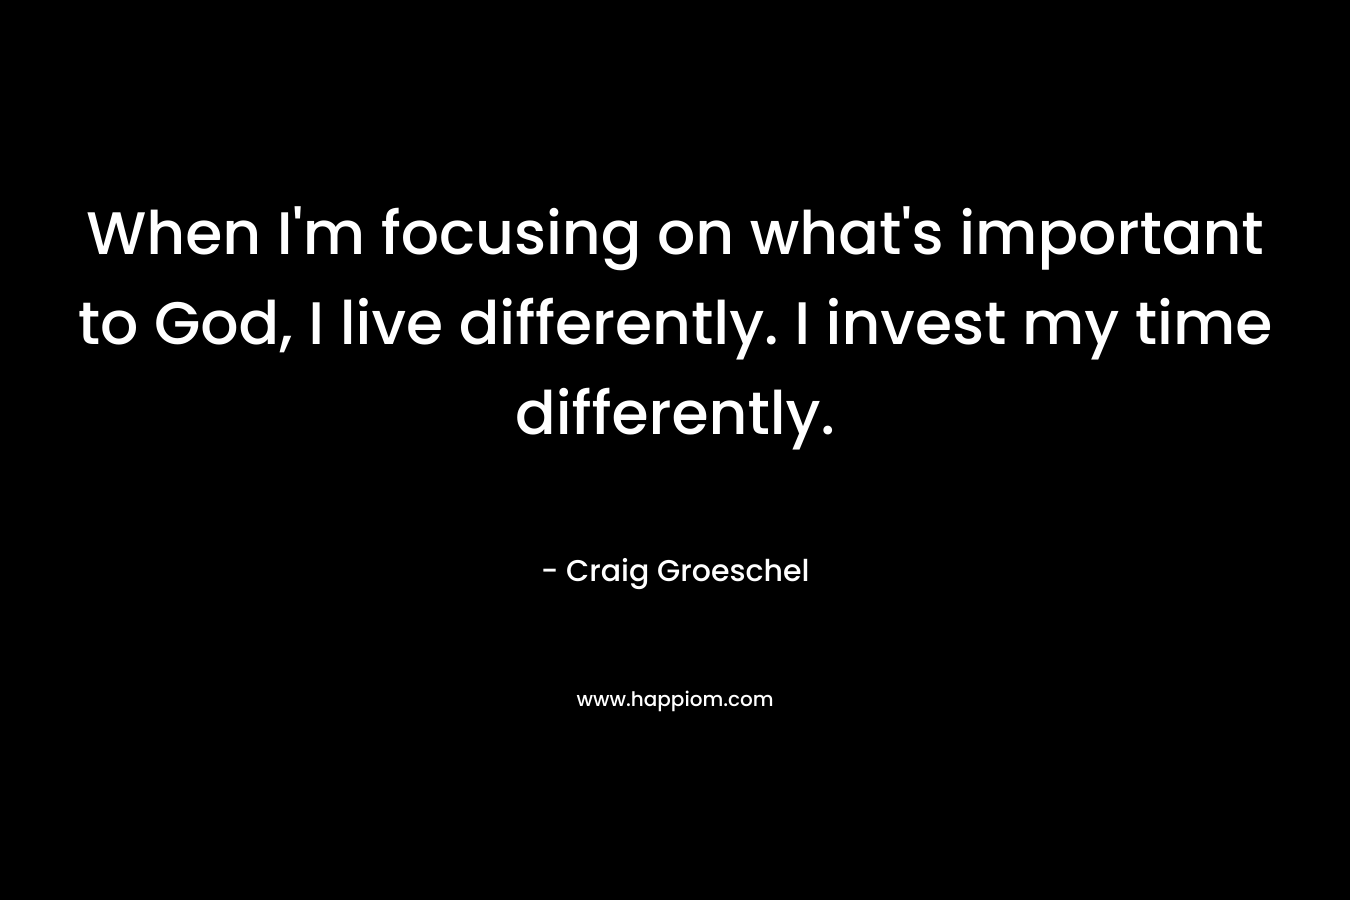 When I’m focusing on what’s important to God, I live differently. I invest my time differently. – Craig Groeschel